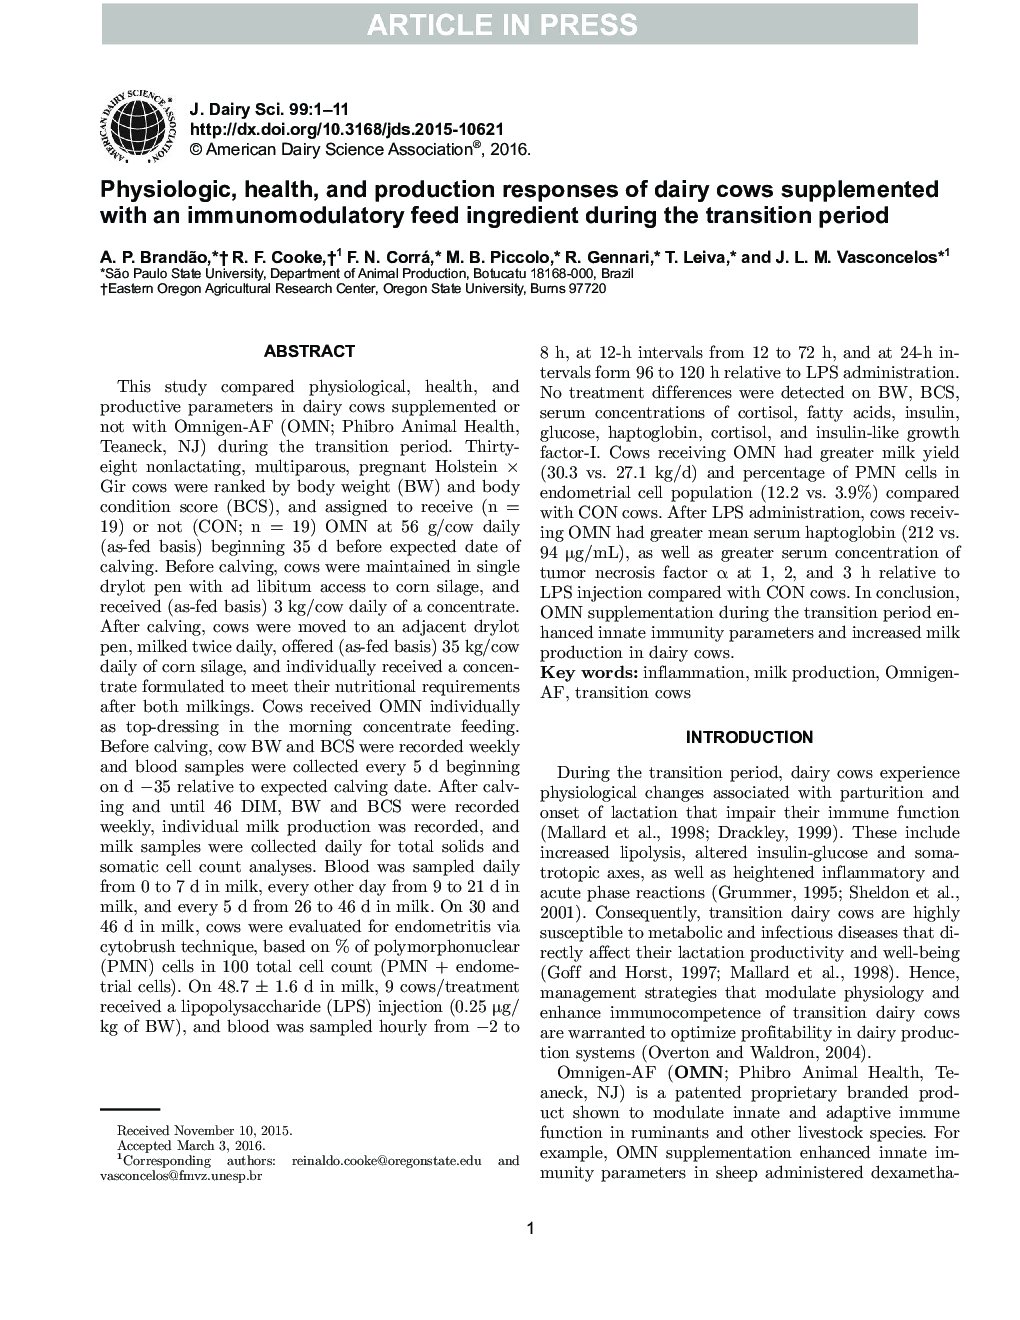 Physiologic, health, and production responses of dairy cows supplemented with an immunomodulatory feed ingredient during the transition period